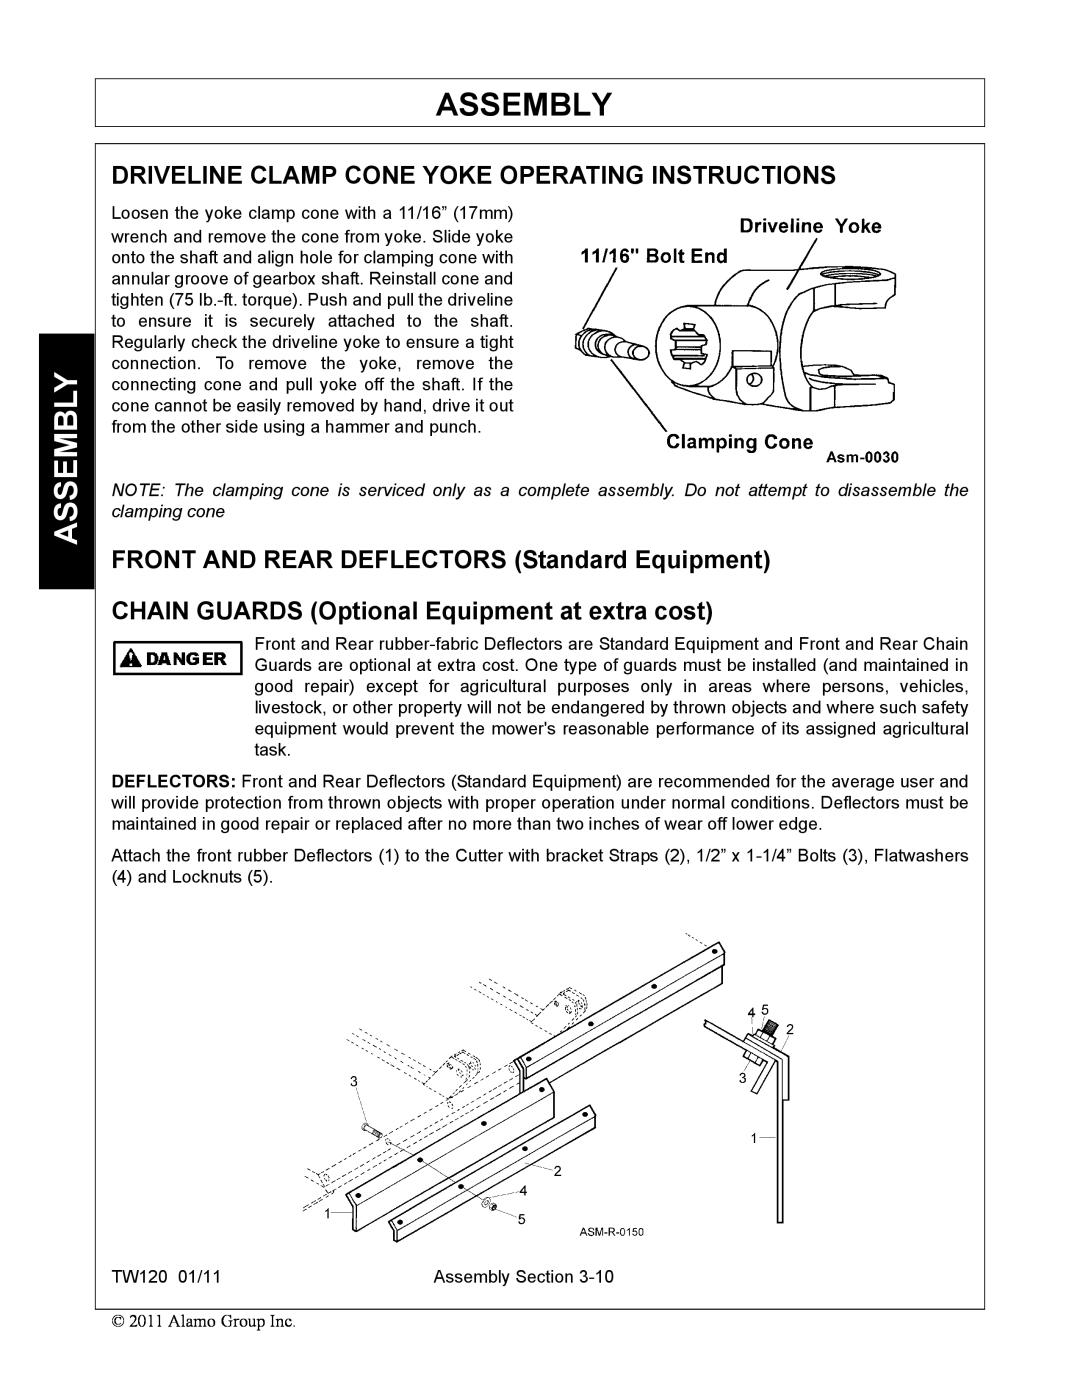 Blue Rhino FC-0024, FC-0025 Driveline Clamp Cone Yoke Operating Instructions, FRONT AND REAR DEFLECTORS Standard Equipment 